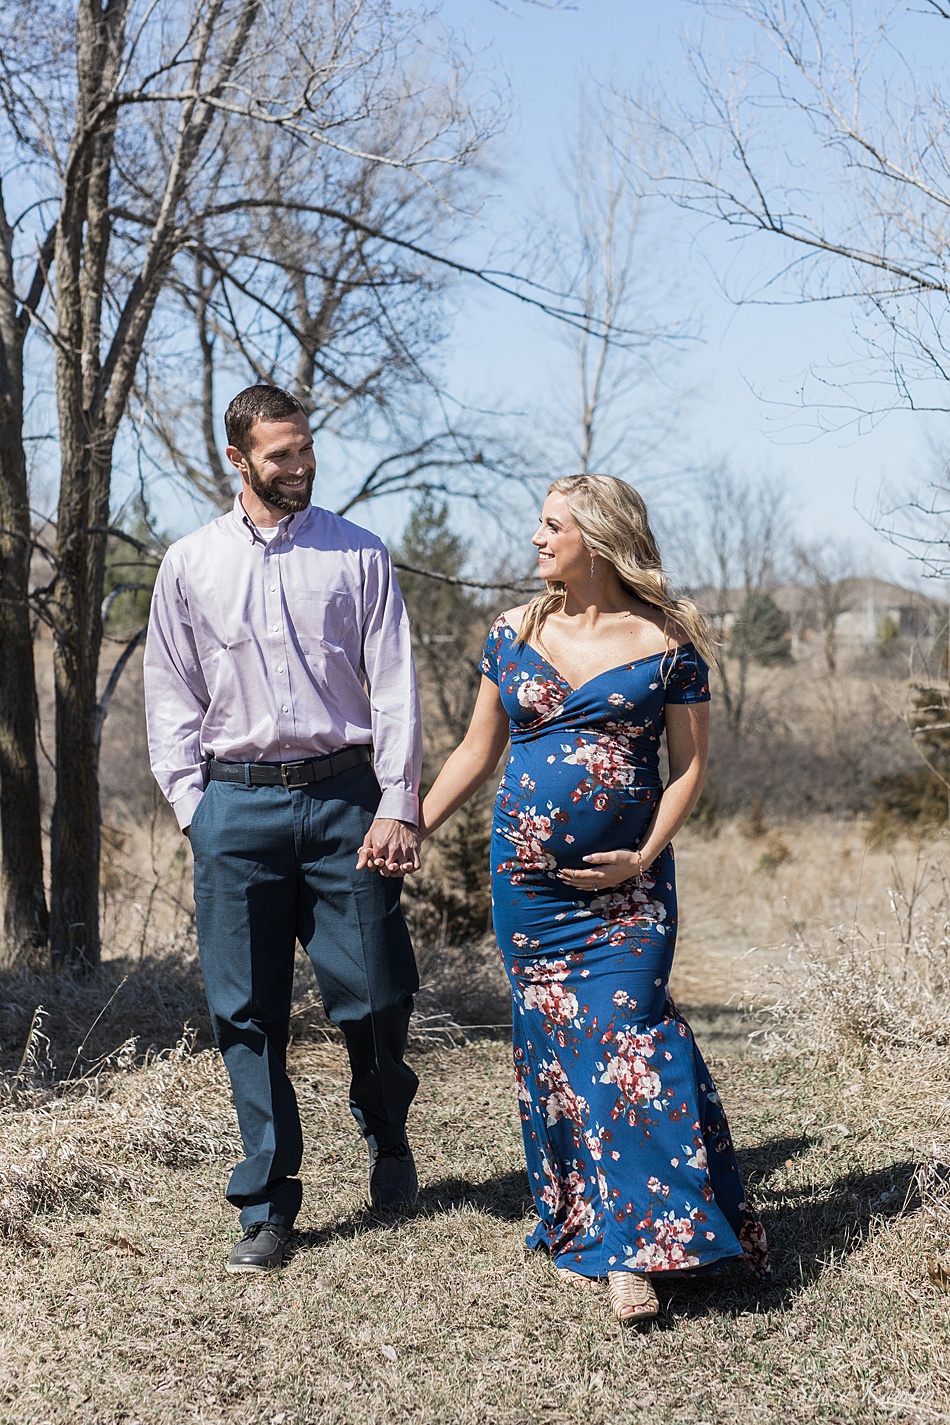 Baby Bump with blue floral dress